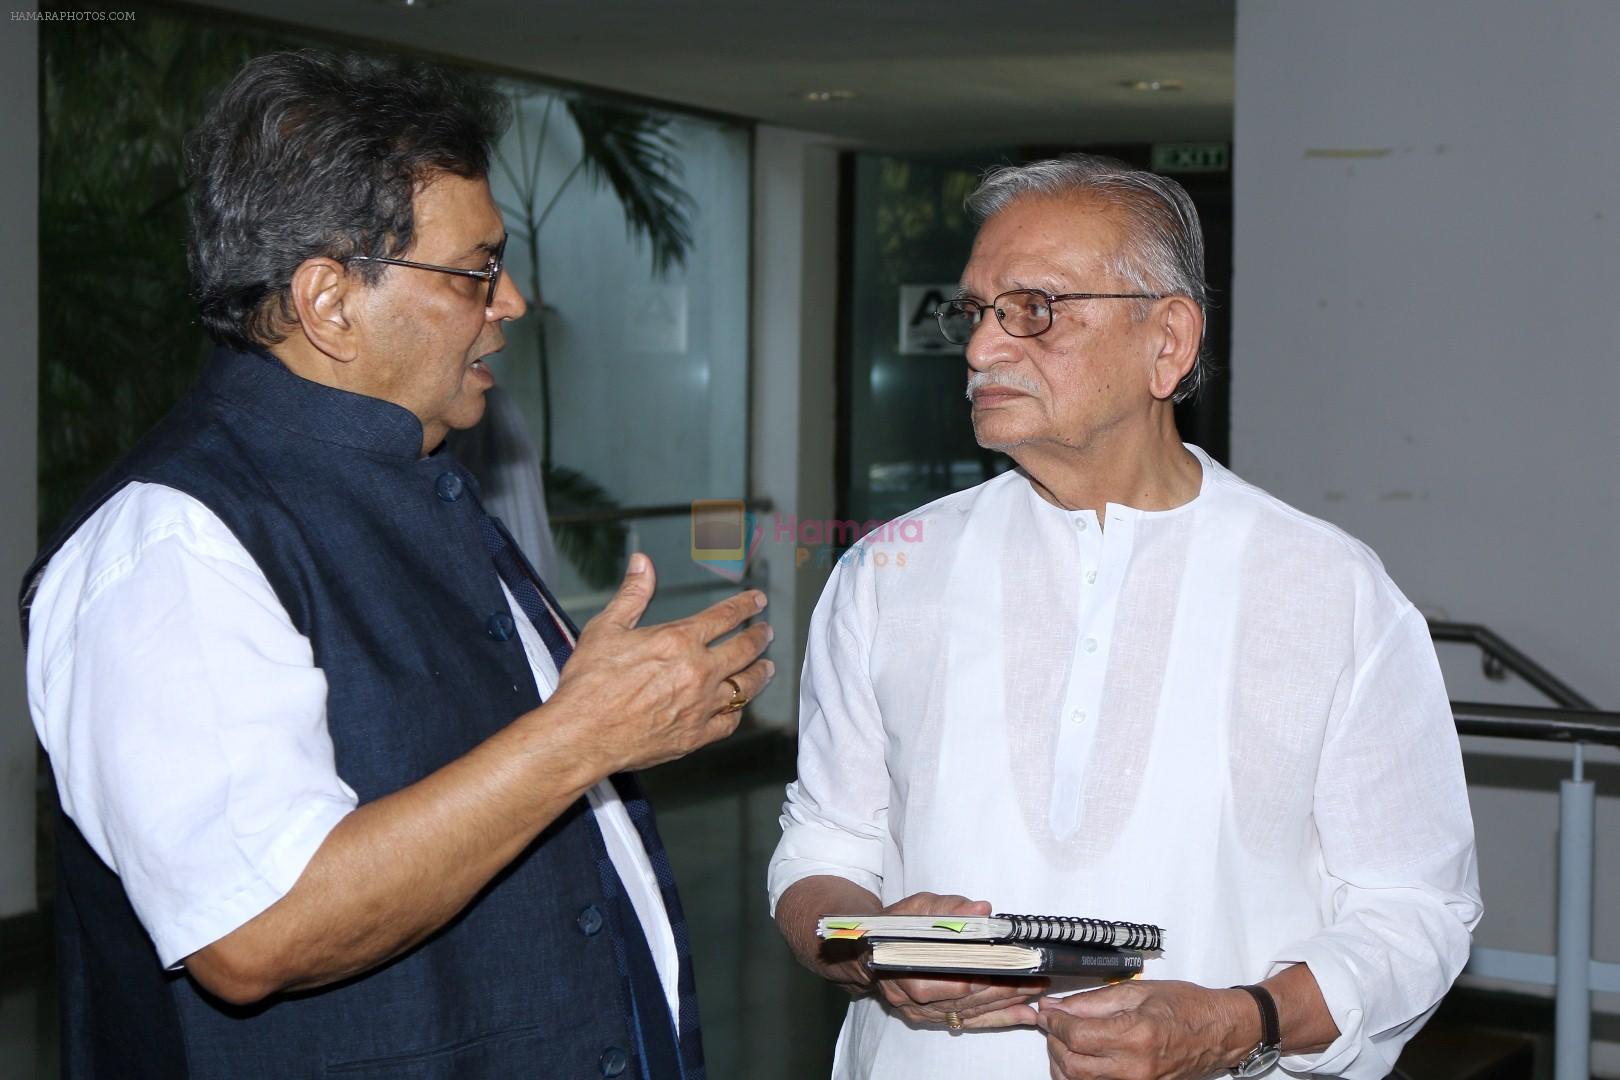 Gulzar, Subhash Ghai At whistling Wood international Interact To Student on 23rd March 2017